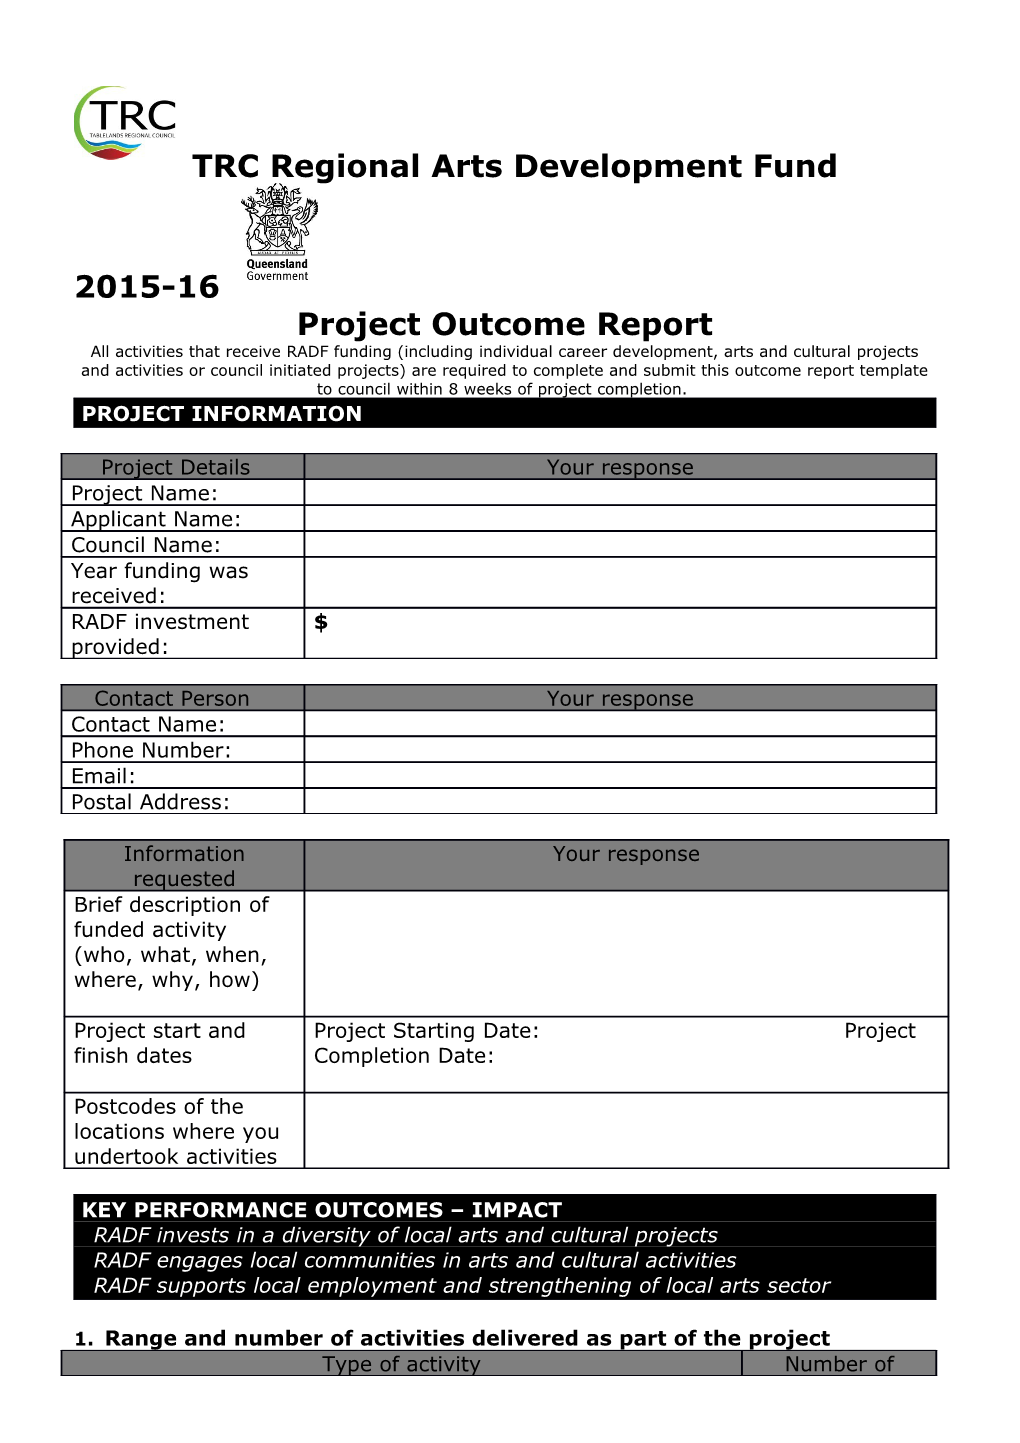 Project Outcome Report